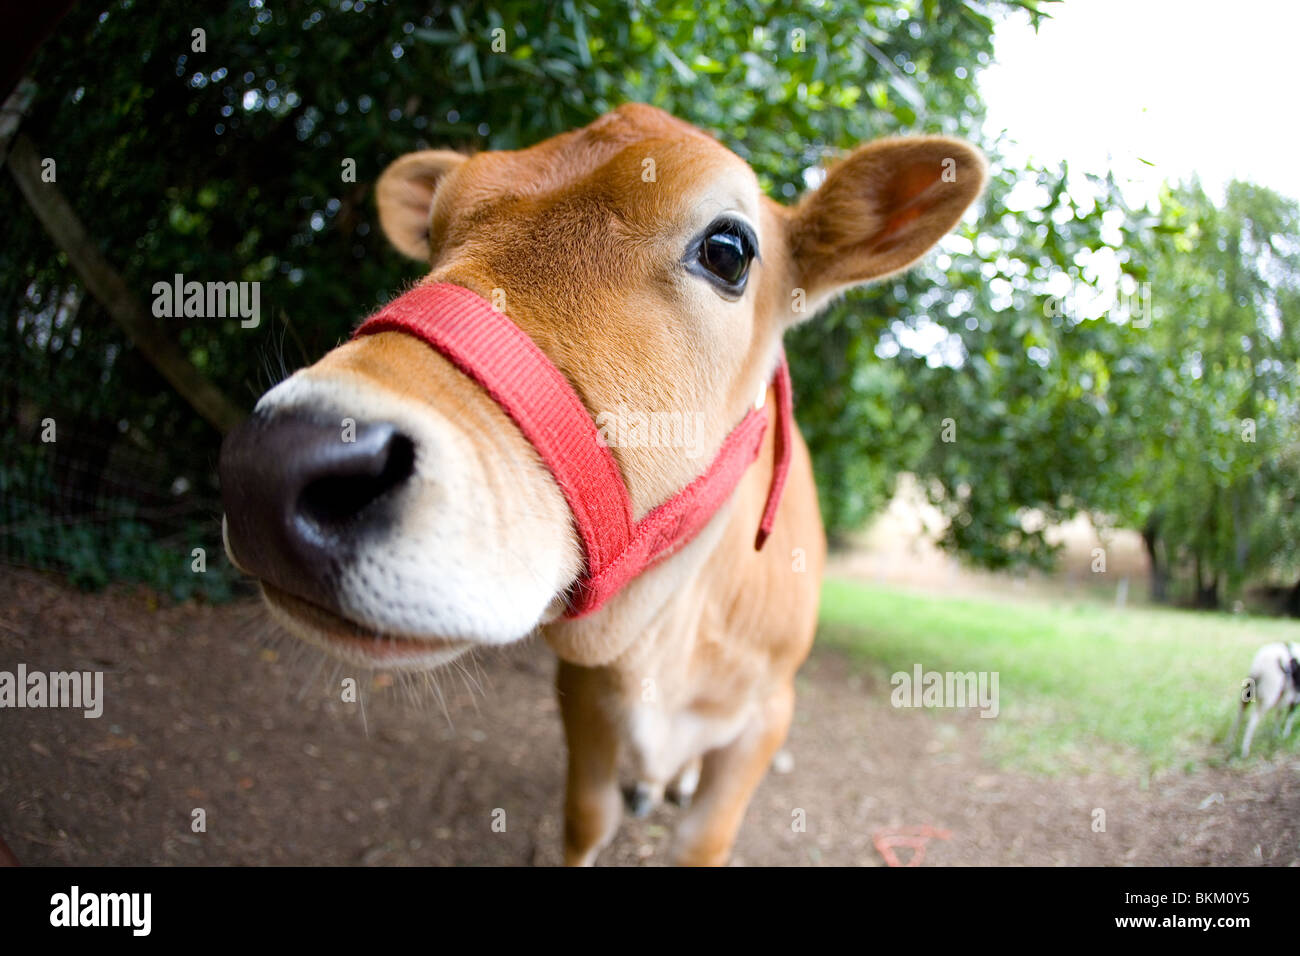 Beautiful brown cow with a red head harness Stock Photo